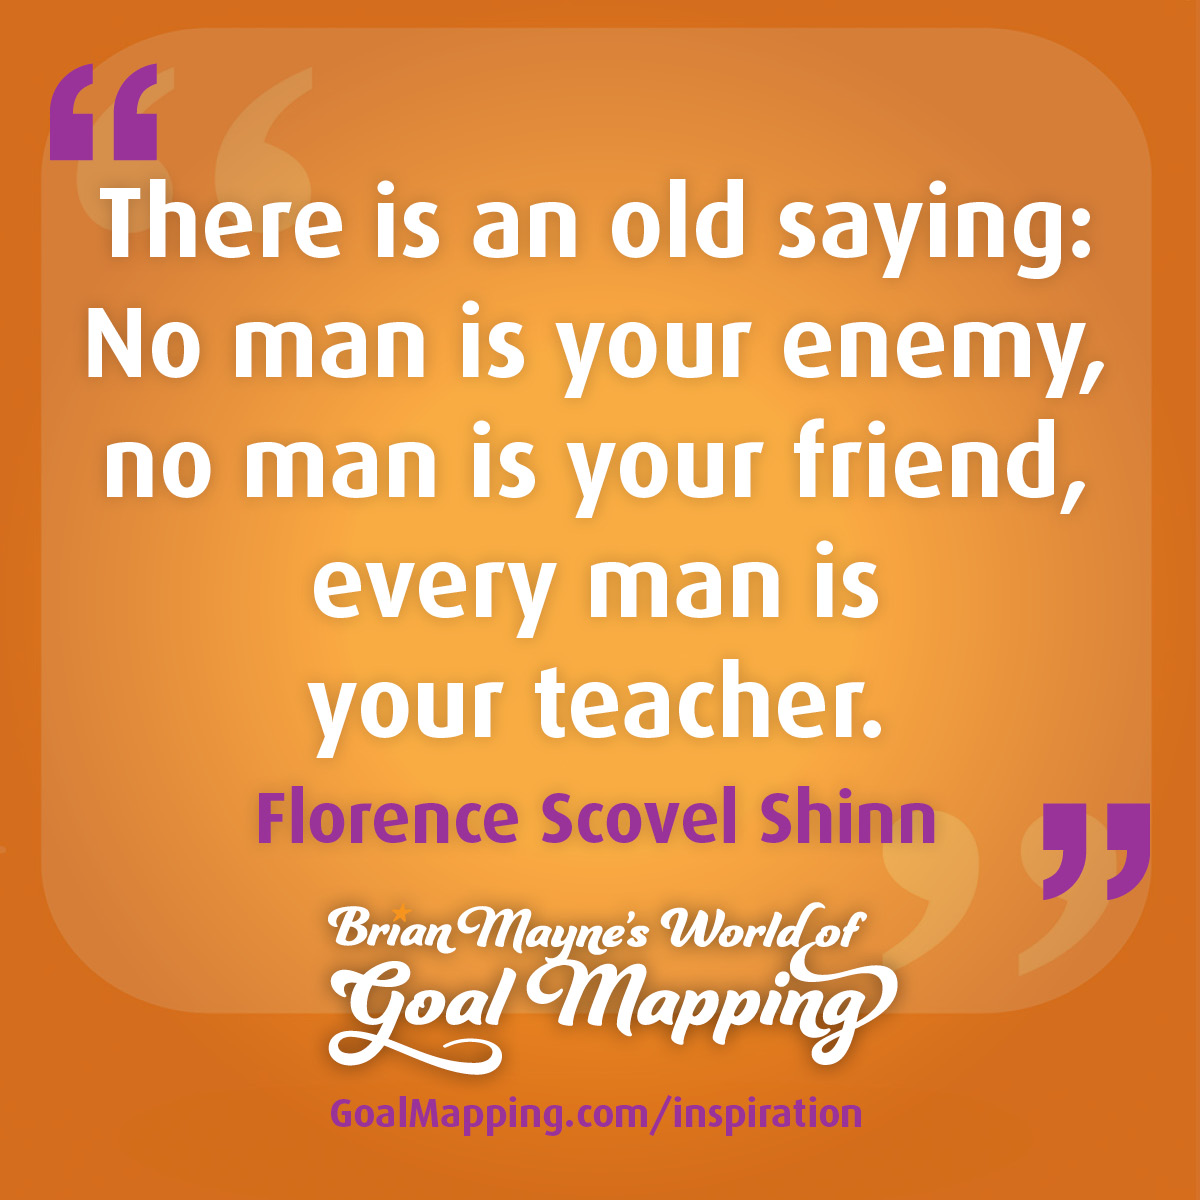 "There is an old saying: No man is your enemy, no man is your friend, every man is your teacher. " Florence Scovel Shinn